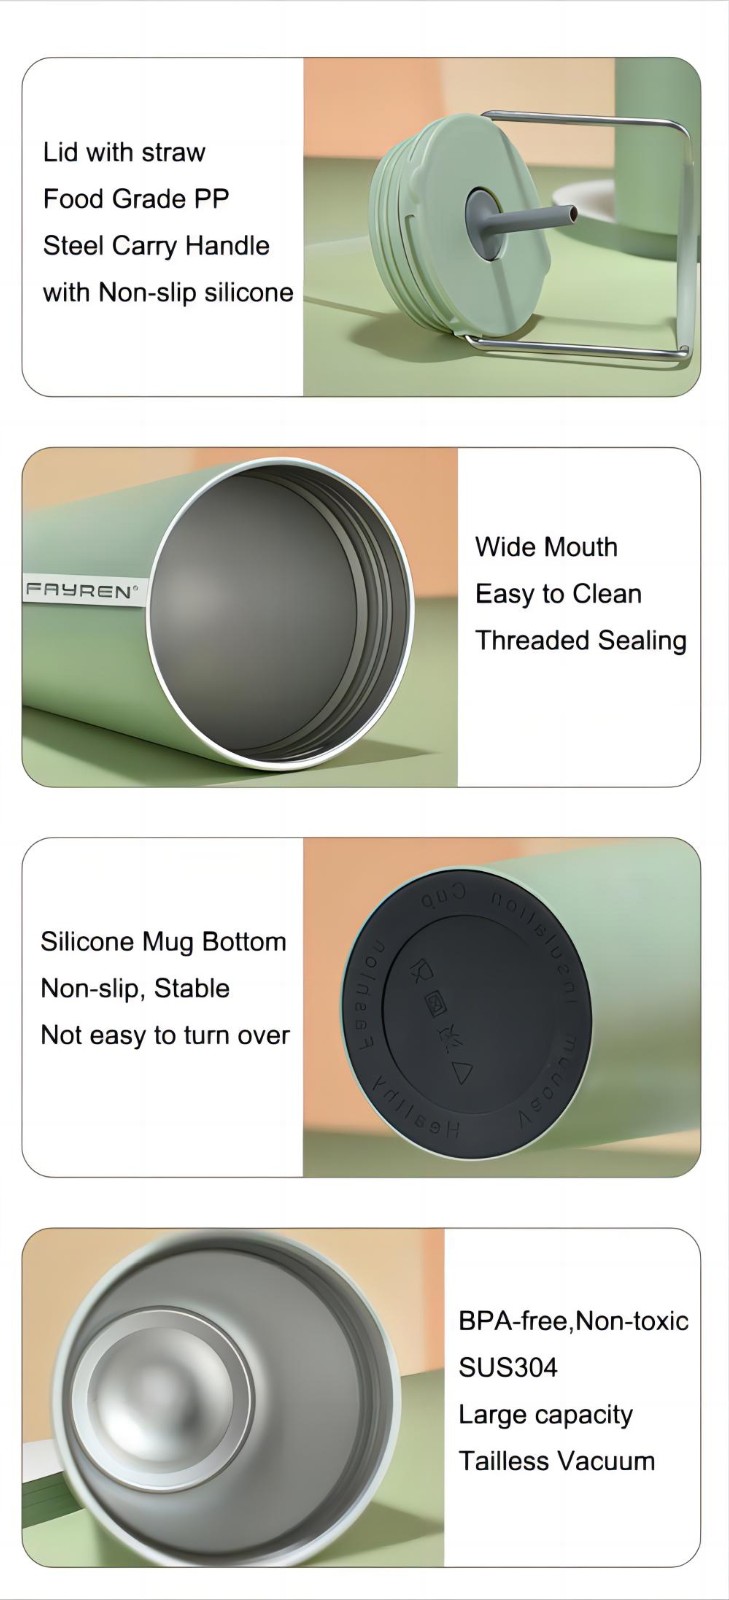 Double Wall Vacuum Insulated Travel Mugs